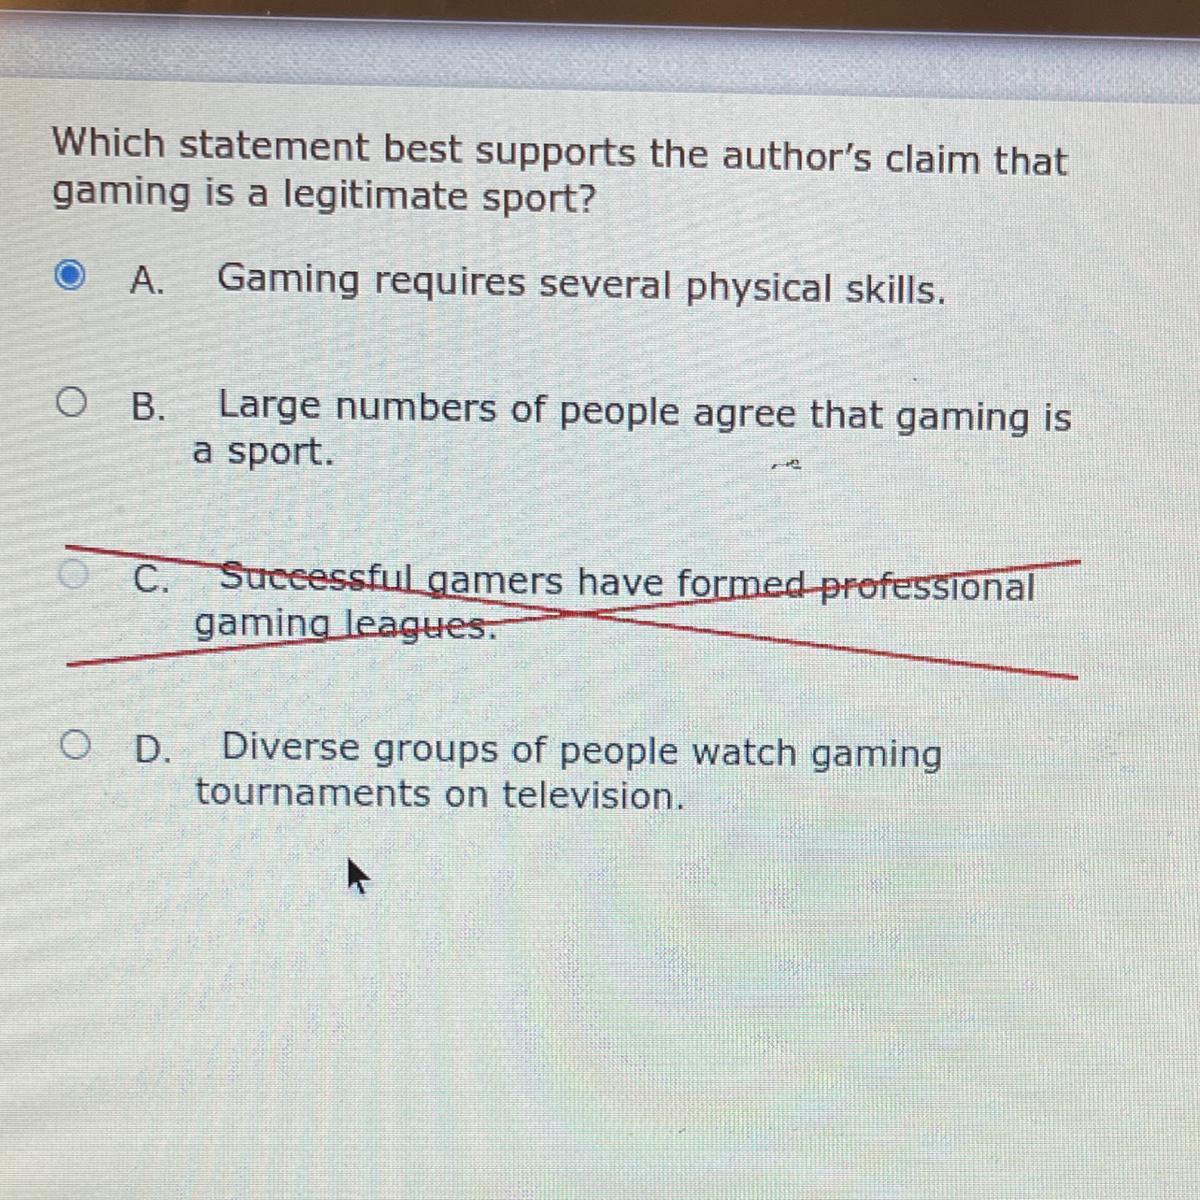 Which Statement Best Supports The Author's Claim Thatgaming Is A Legitimate Sport?